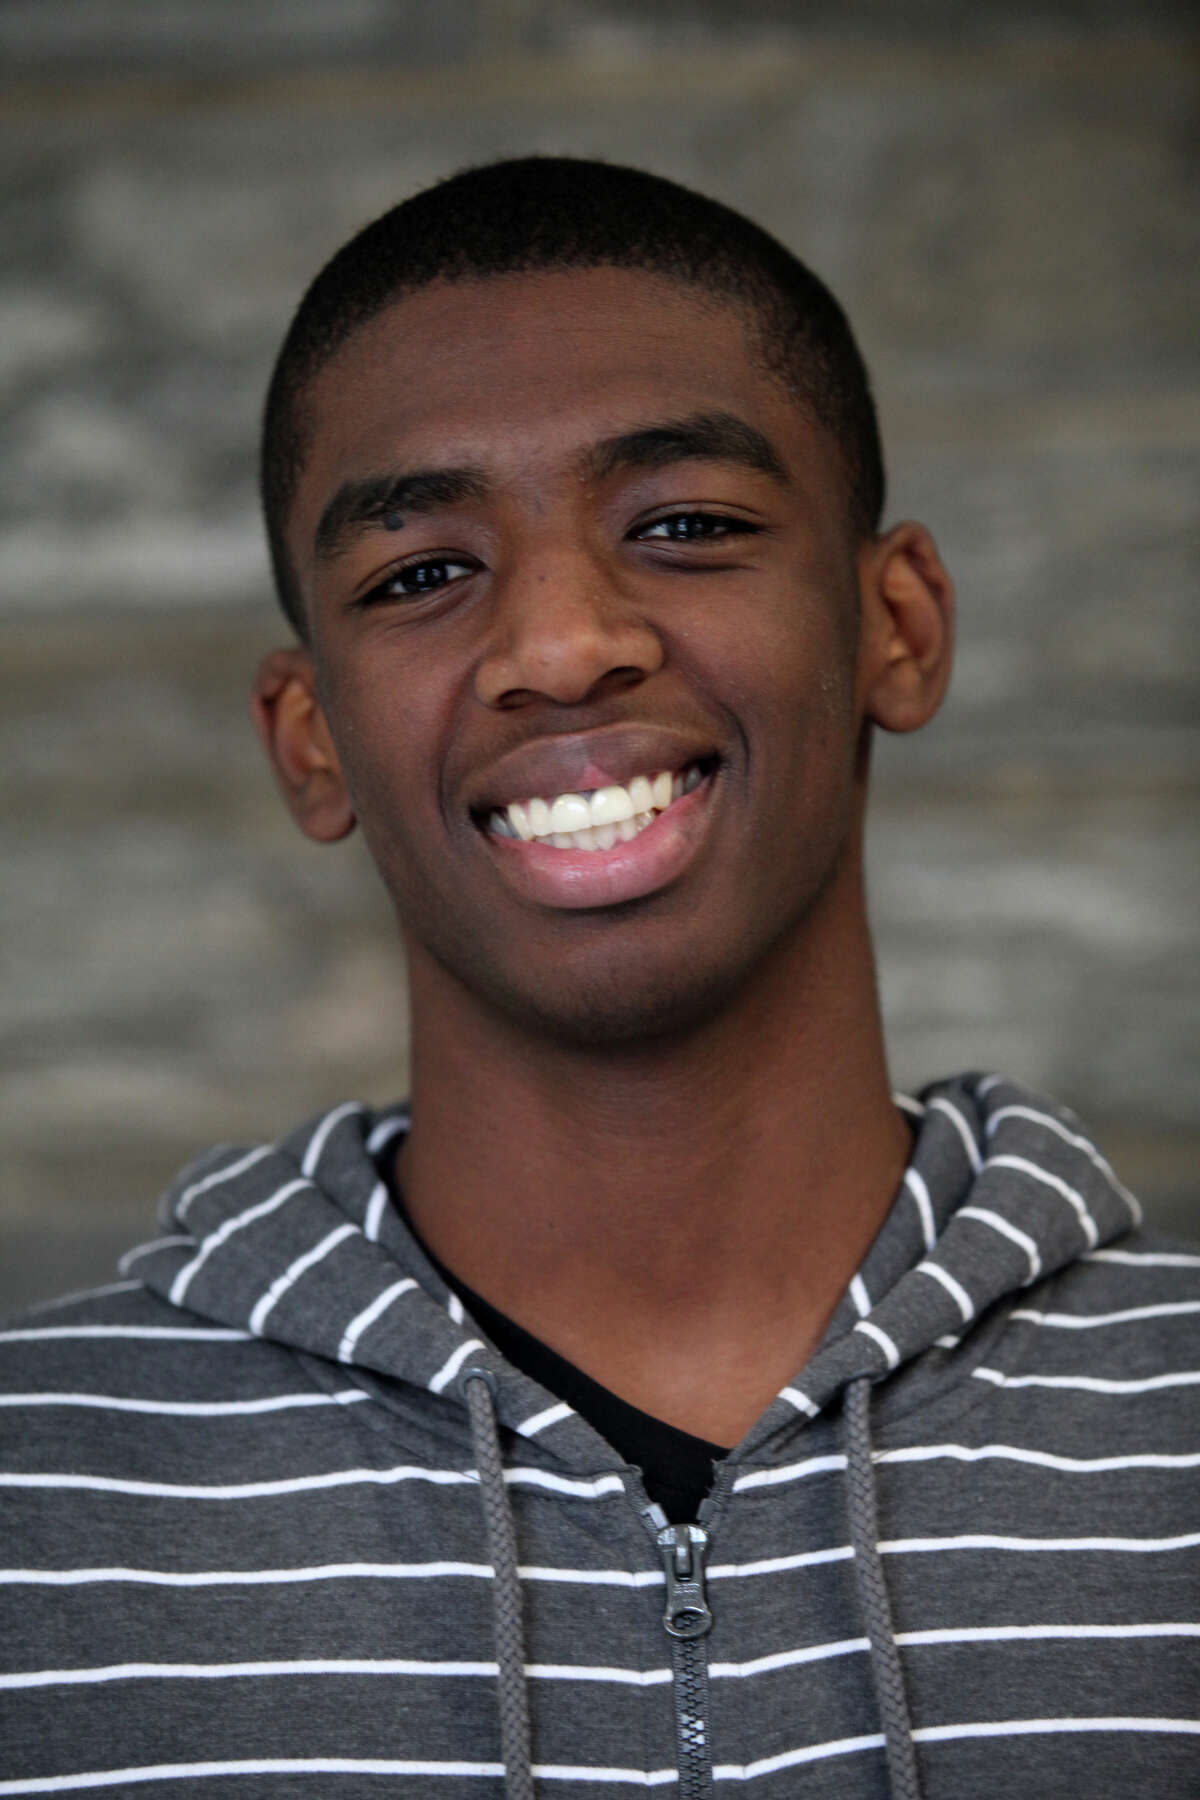 Bunnell basketball player Issac Vann is theCT Post Male Athlete of the Week on Monday, January 28, 2013.